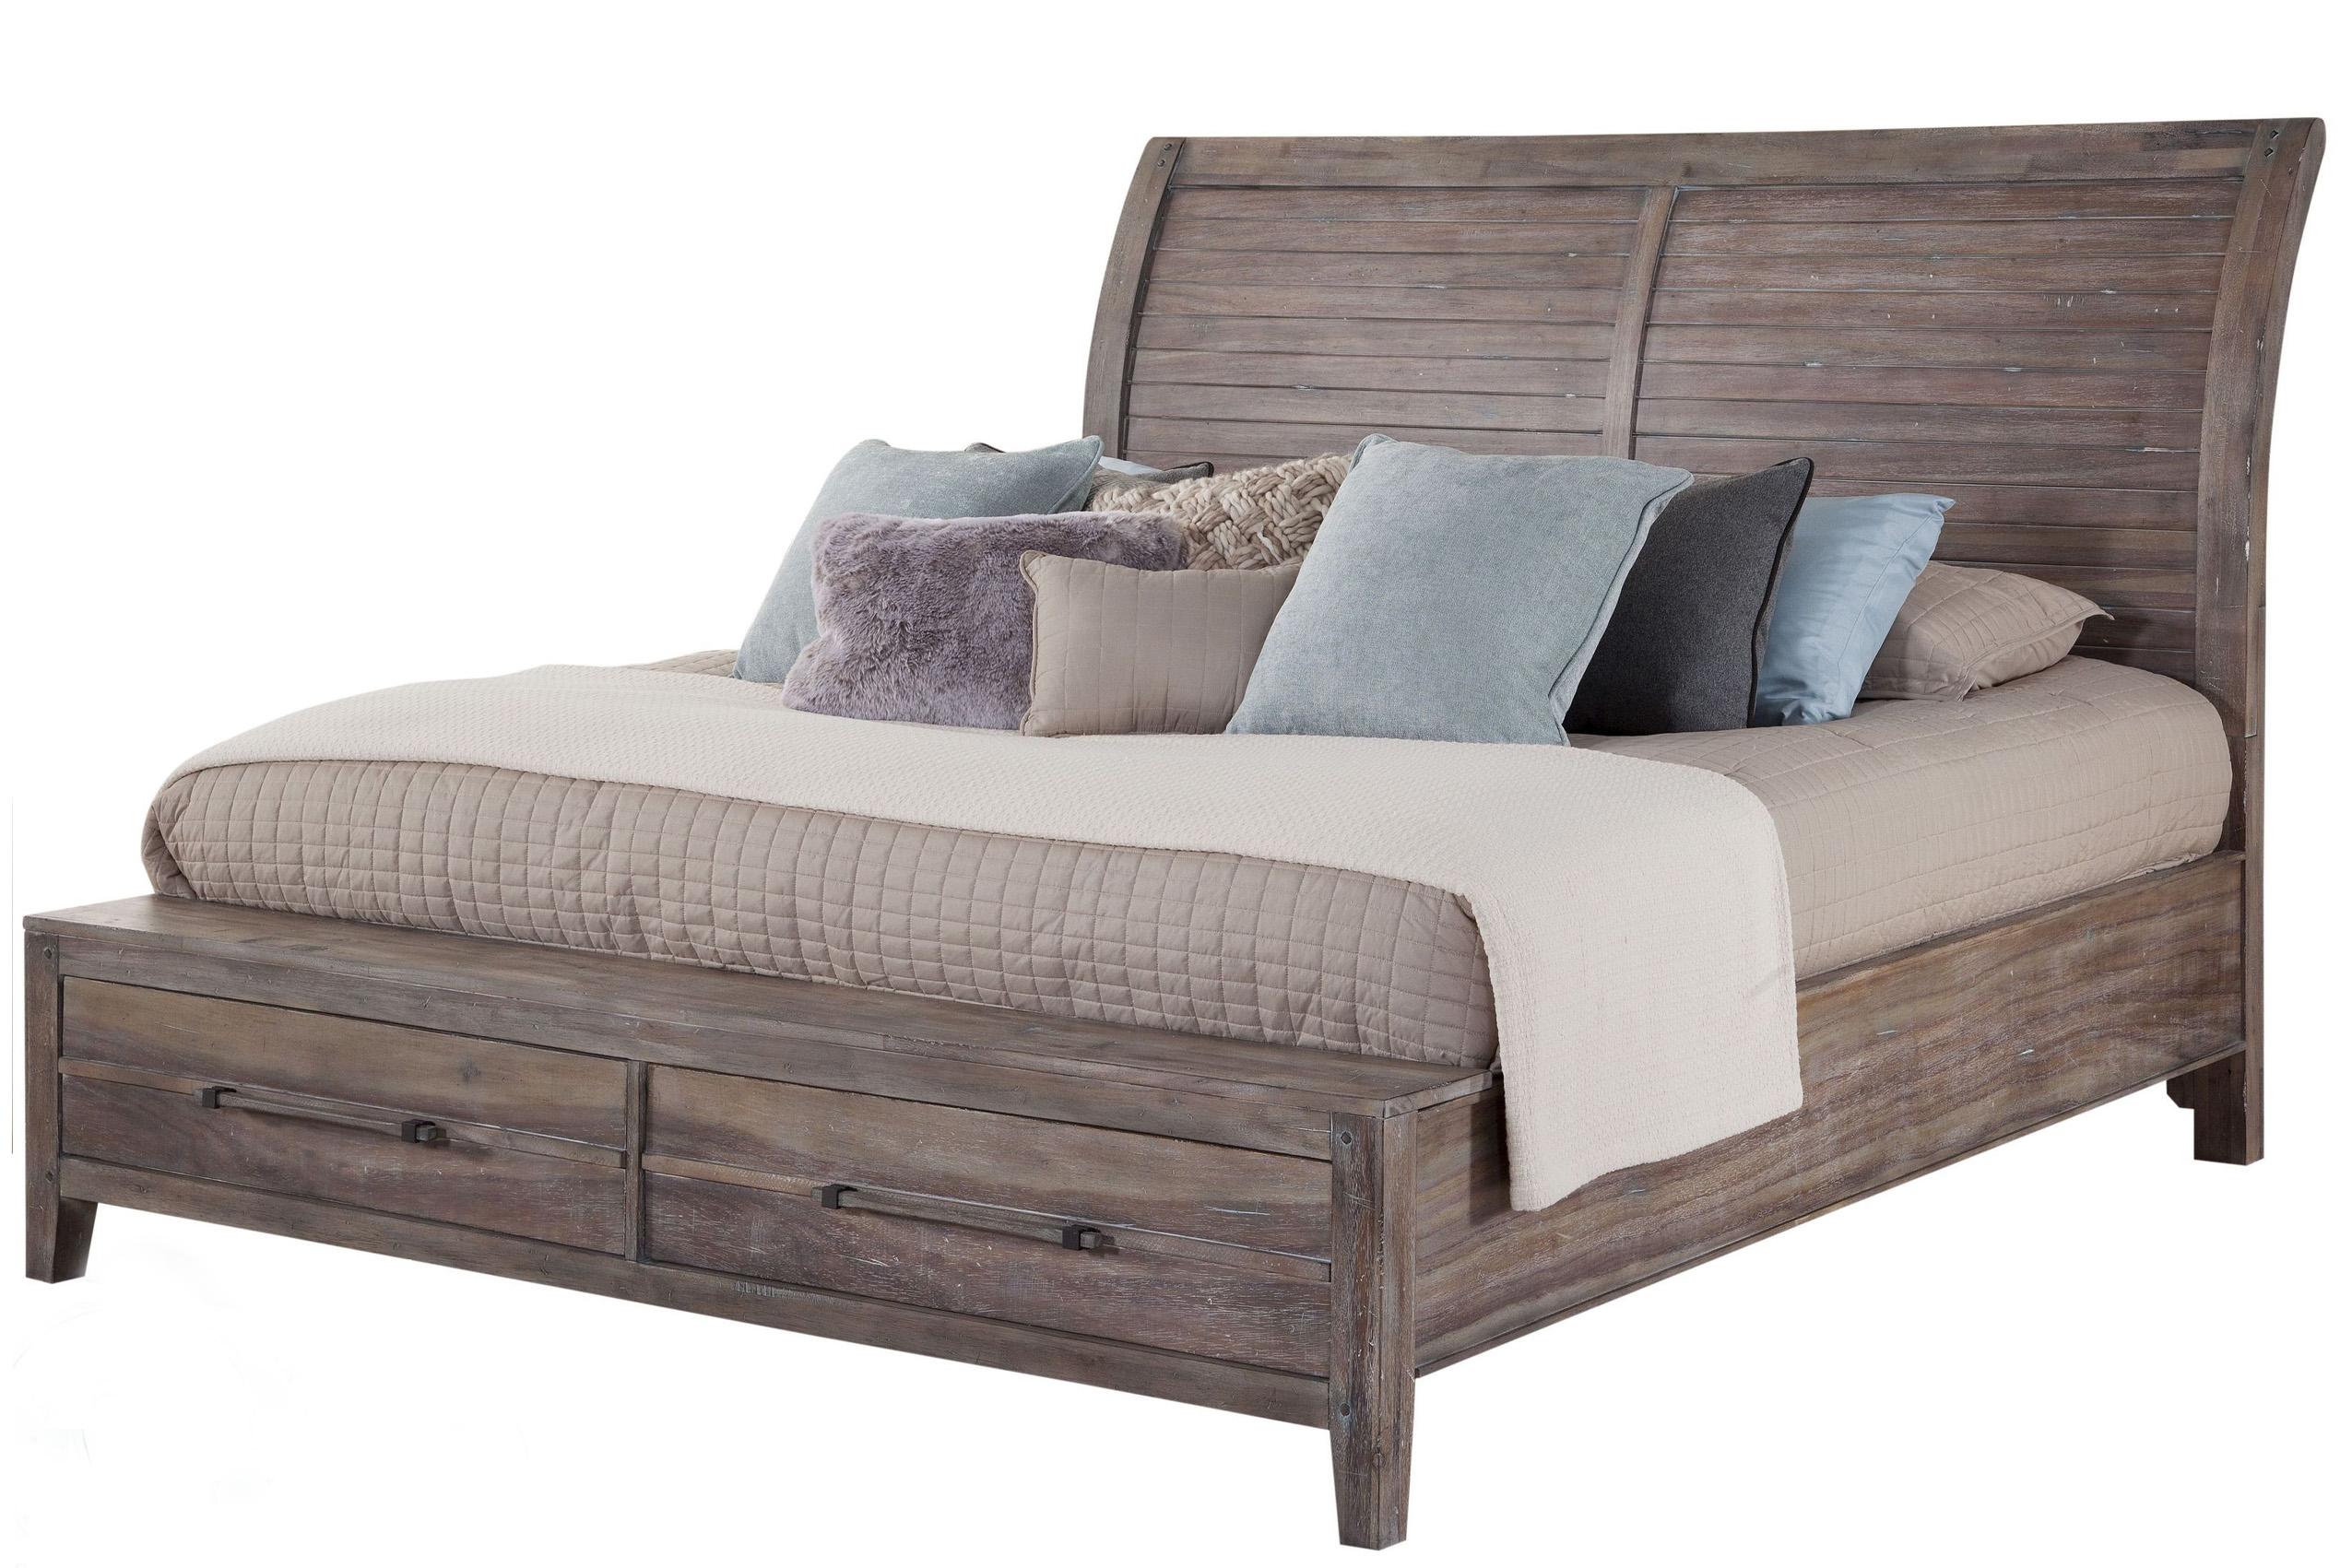 

    
American Woodcrafters AURORA 2800-50SLES Sleigh Bedroom Set Driftwood/Gray 2800-QSLST-4PC
